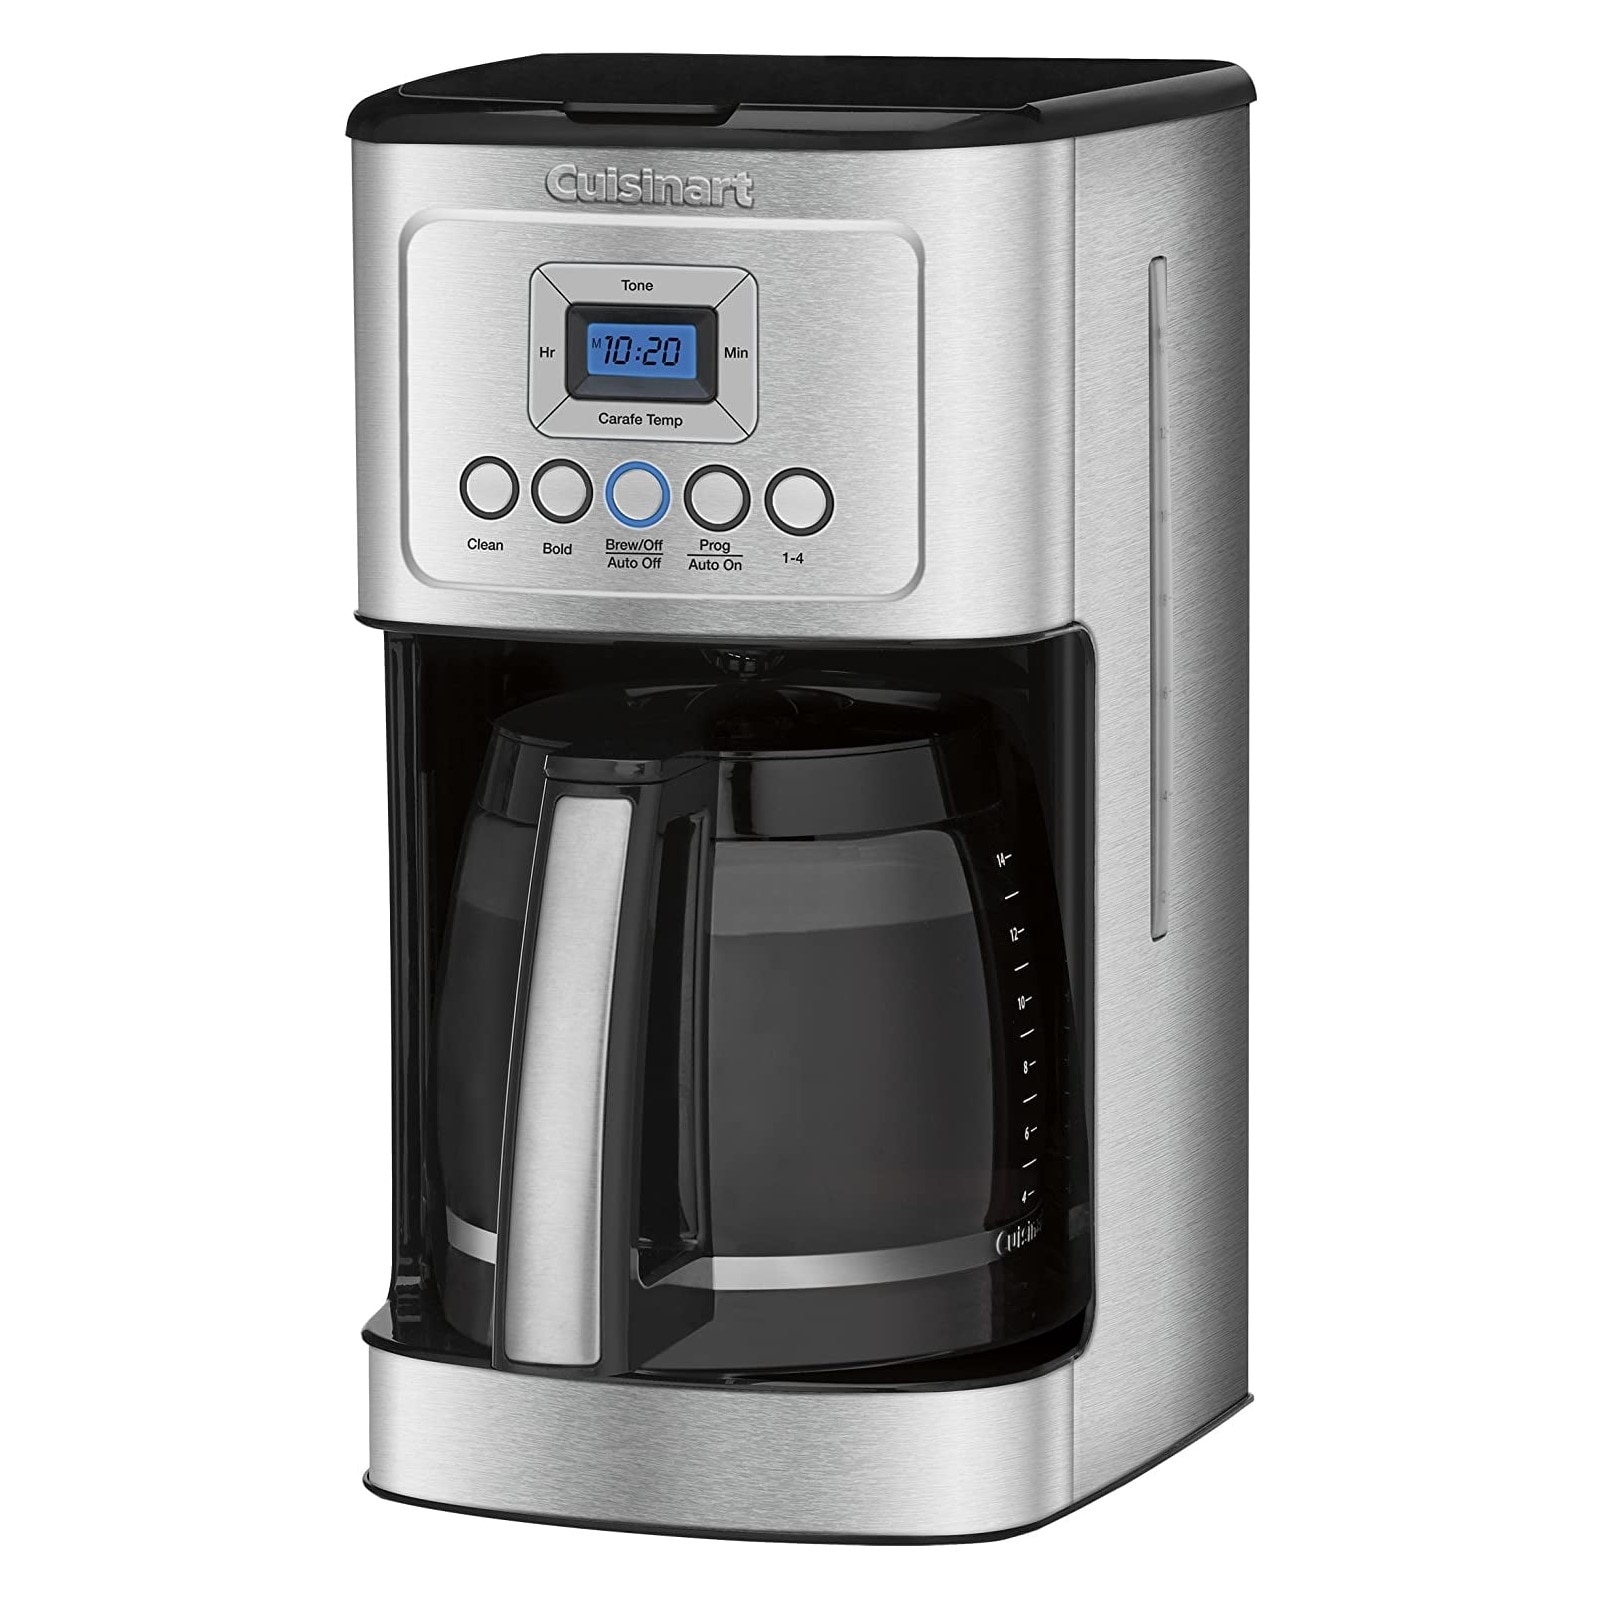 https://ak1.ostkcdn.com/images/products/is/images/direct/136c57593f1709d160f04ef31346afd496d0e555/Home-Edition-14-Cup-Programmable-Coffeemaker.jpg